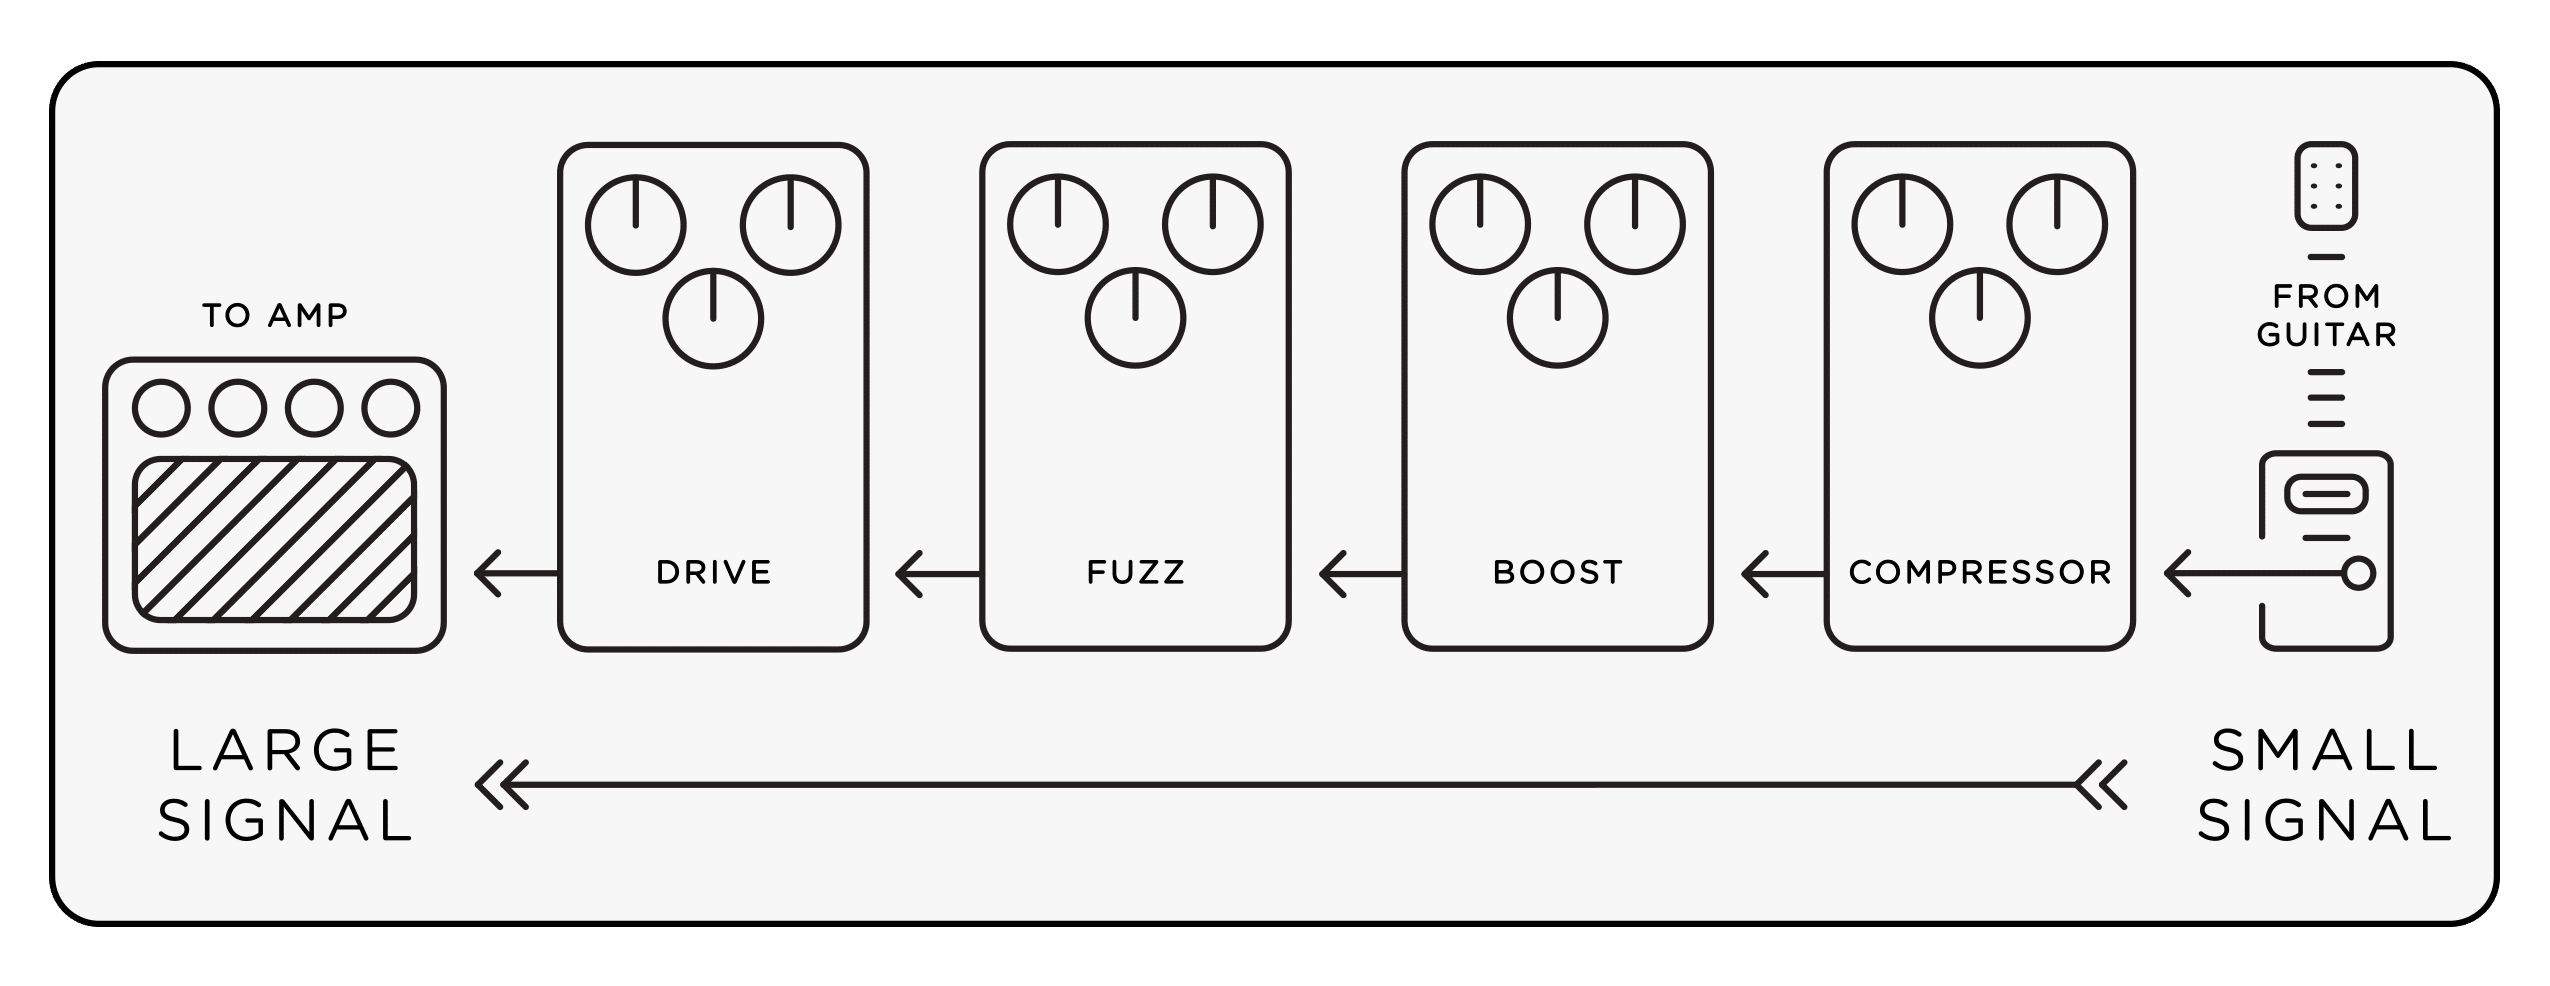 Effects Pedal Power Supply white paper illustration 1